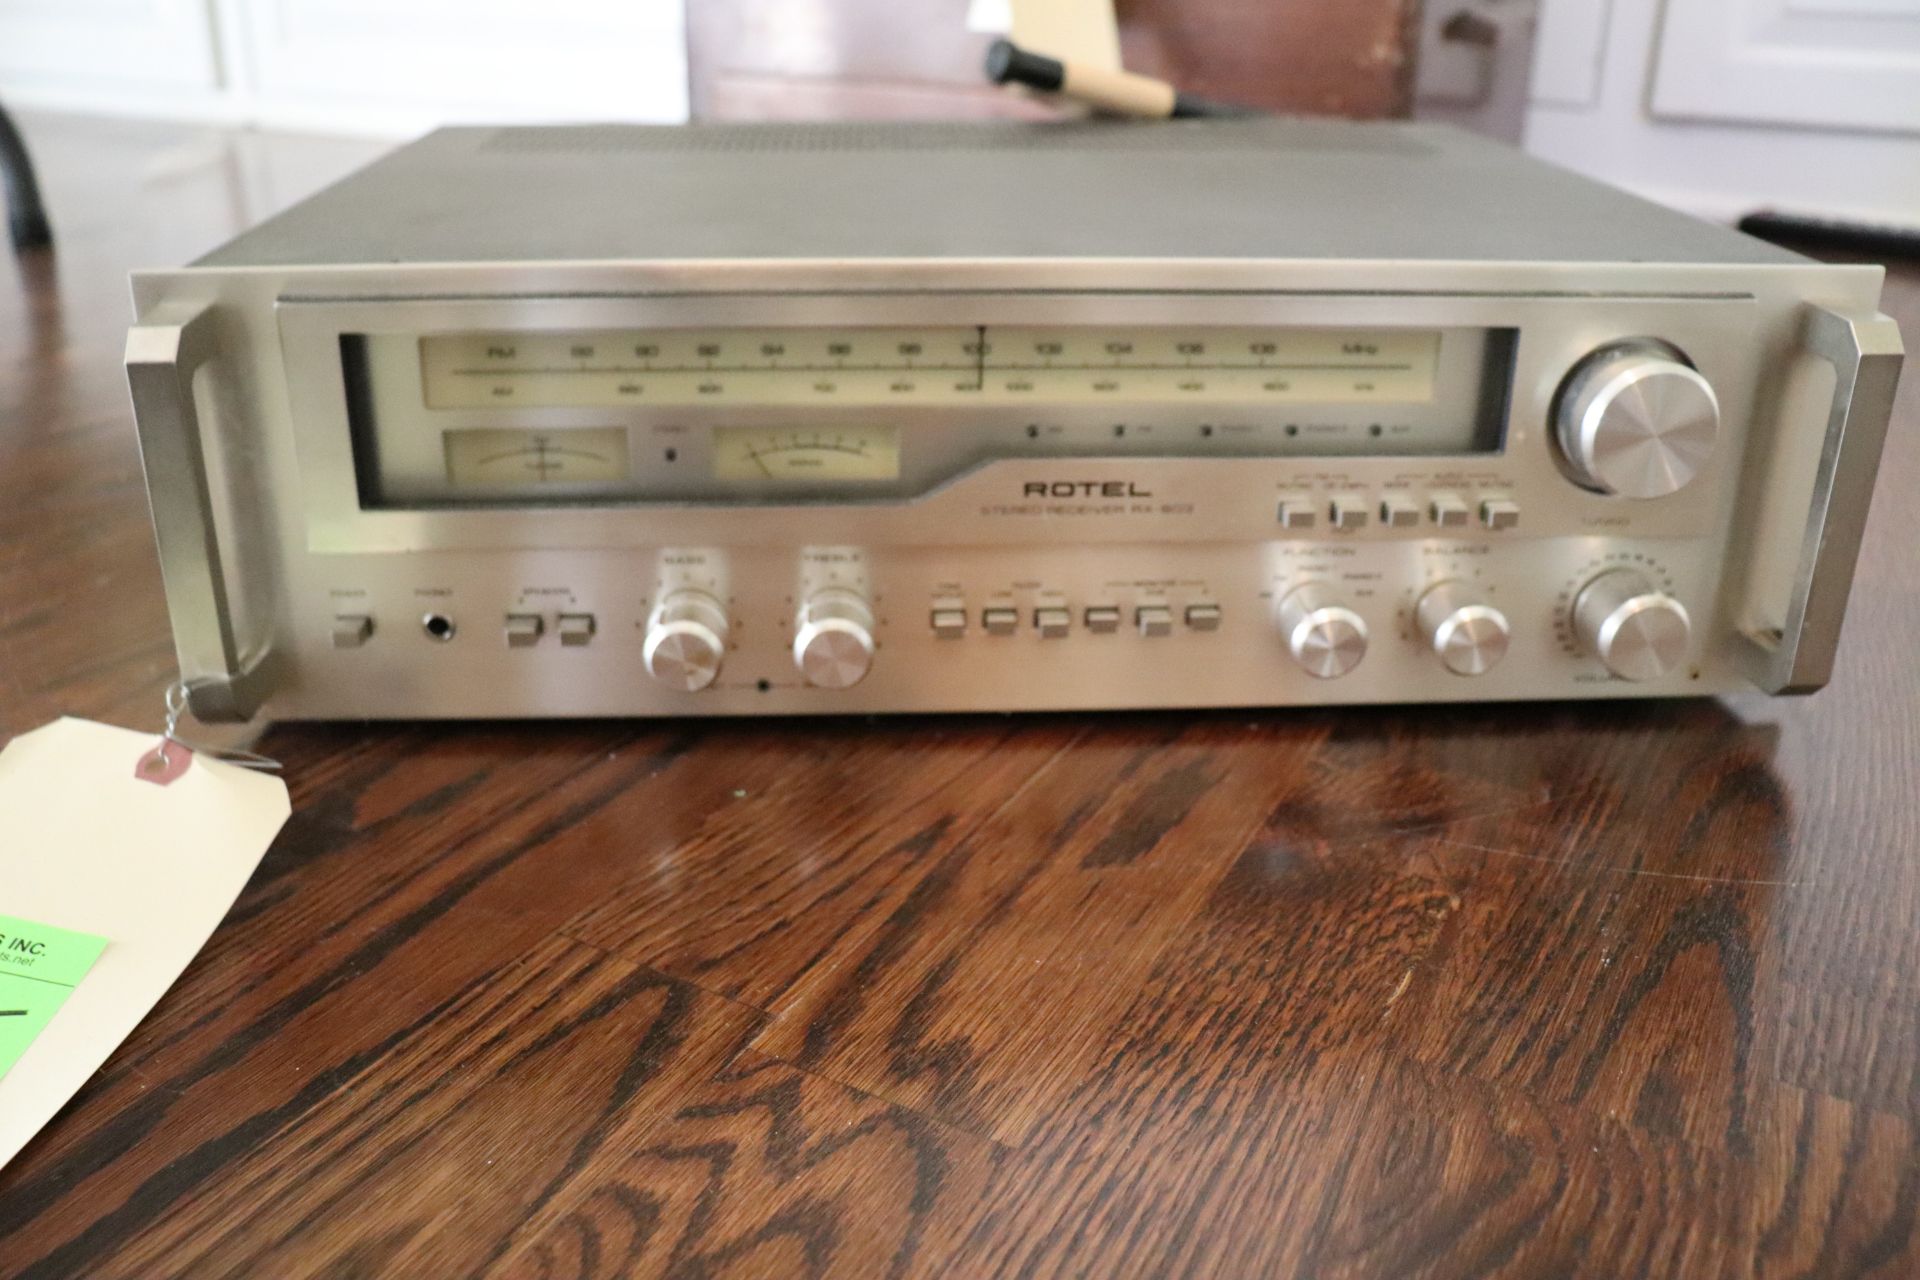 Rotel stereo receiver, model RX-803